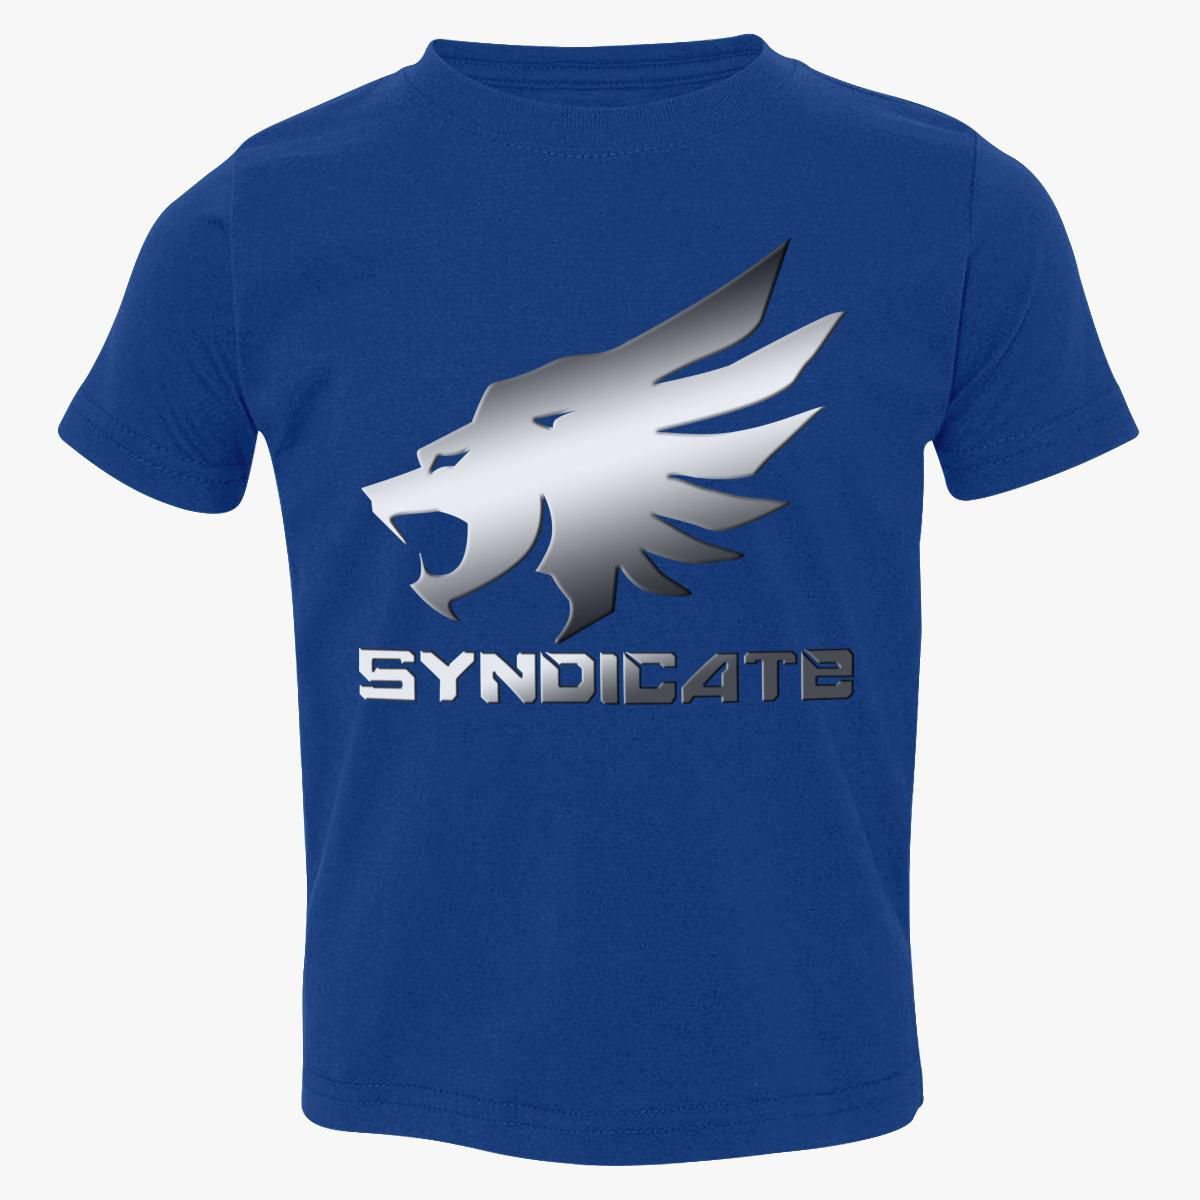 syndicate project